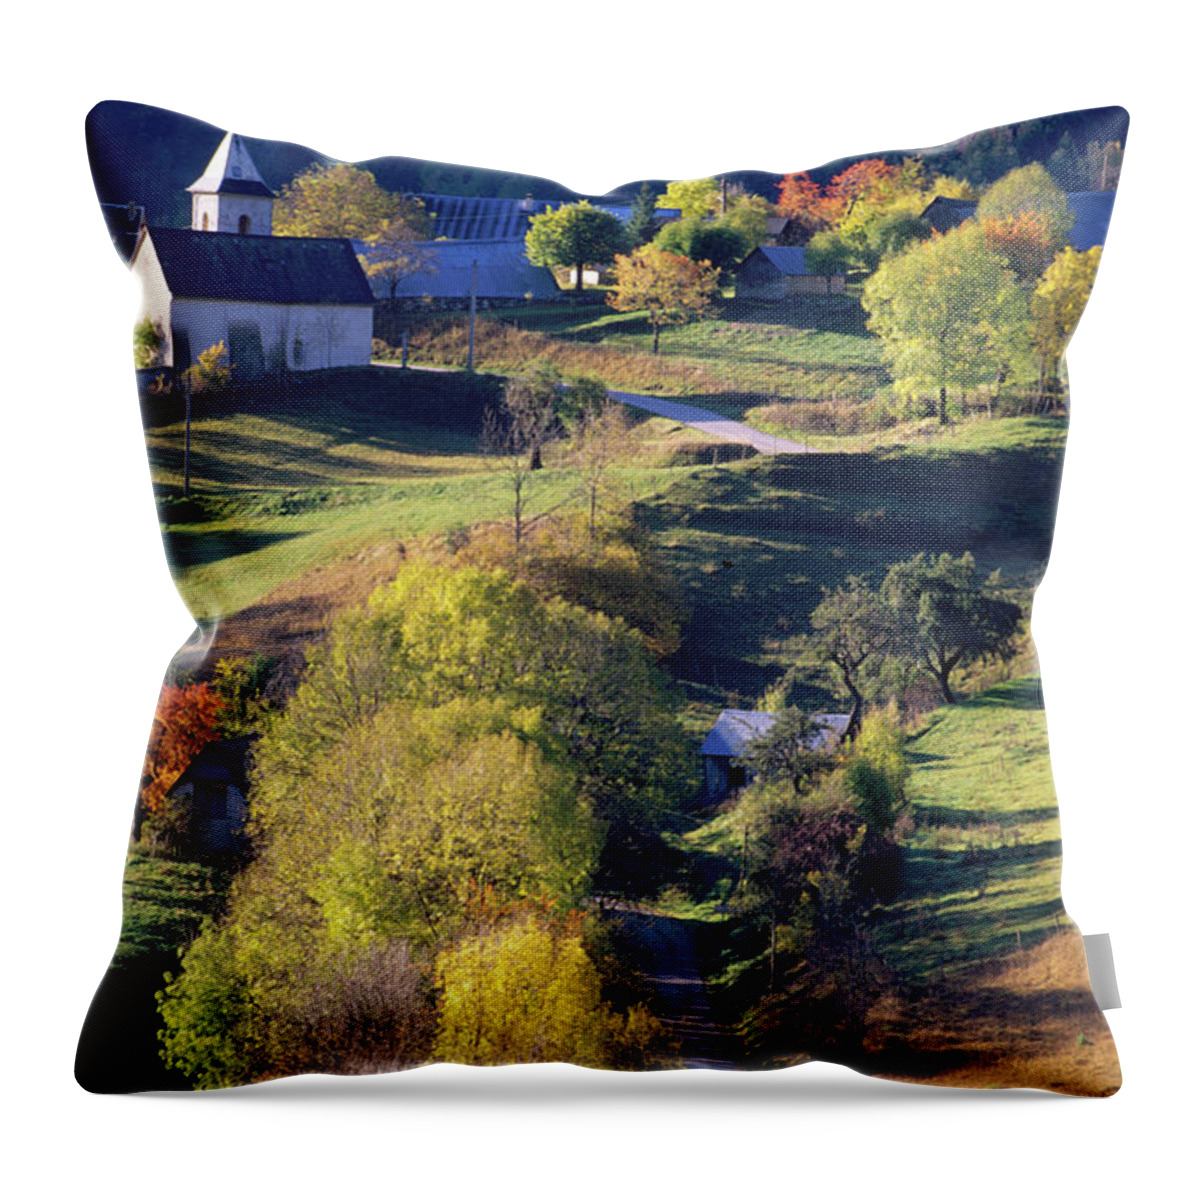 Scenics Throw Pillow featuring the photograph Autumn In The Alps by Martial Colomb